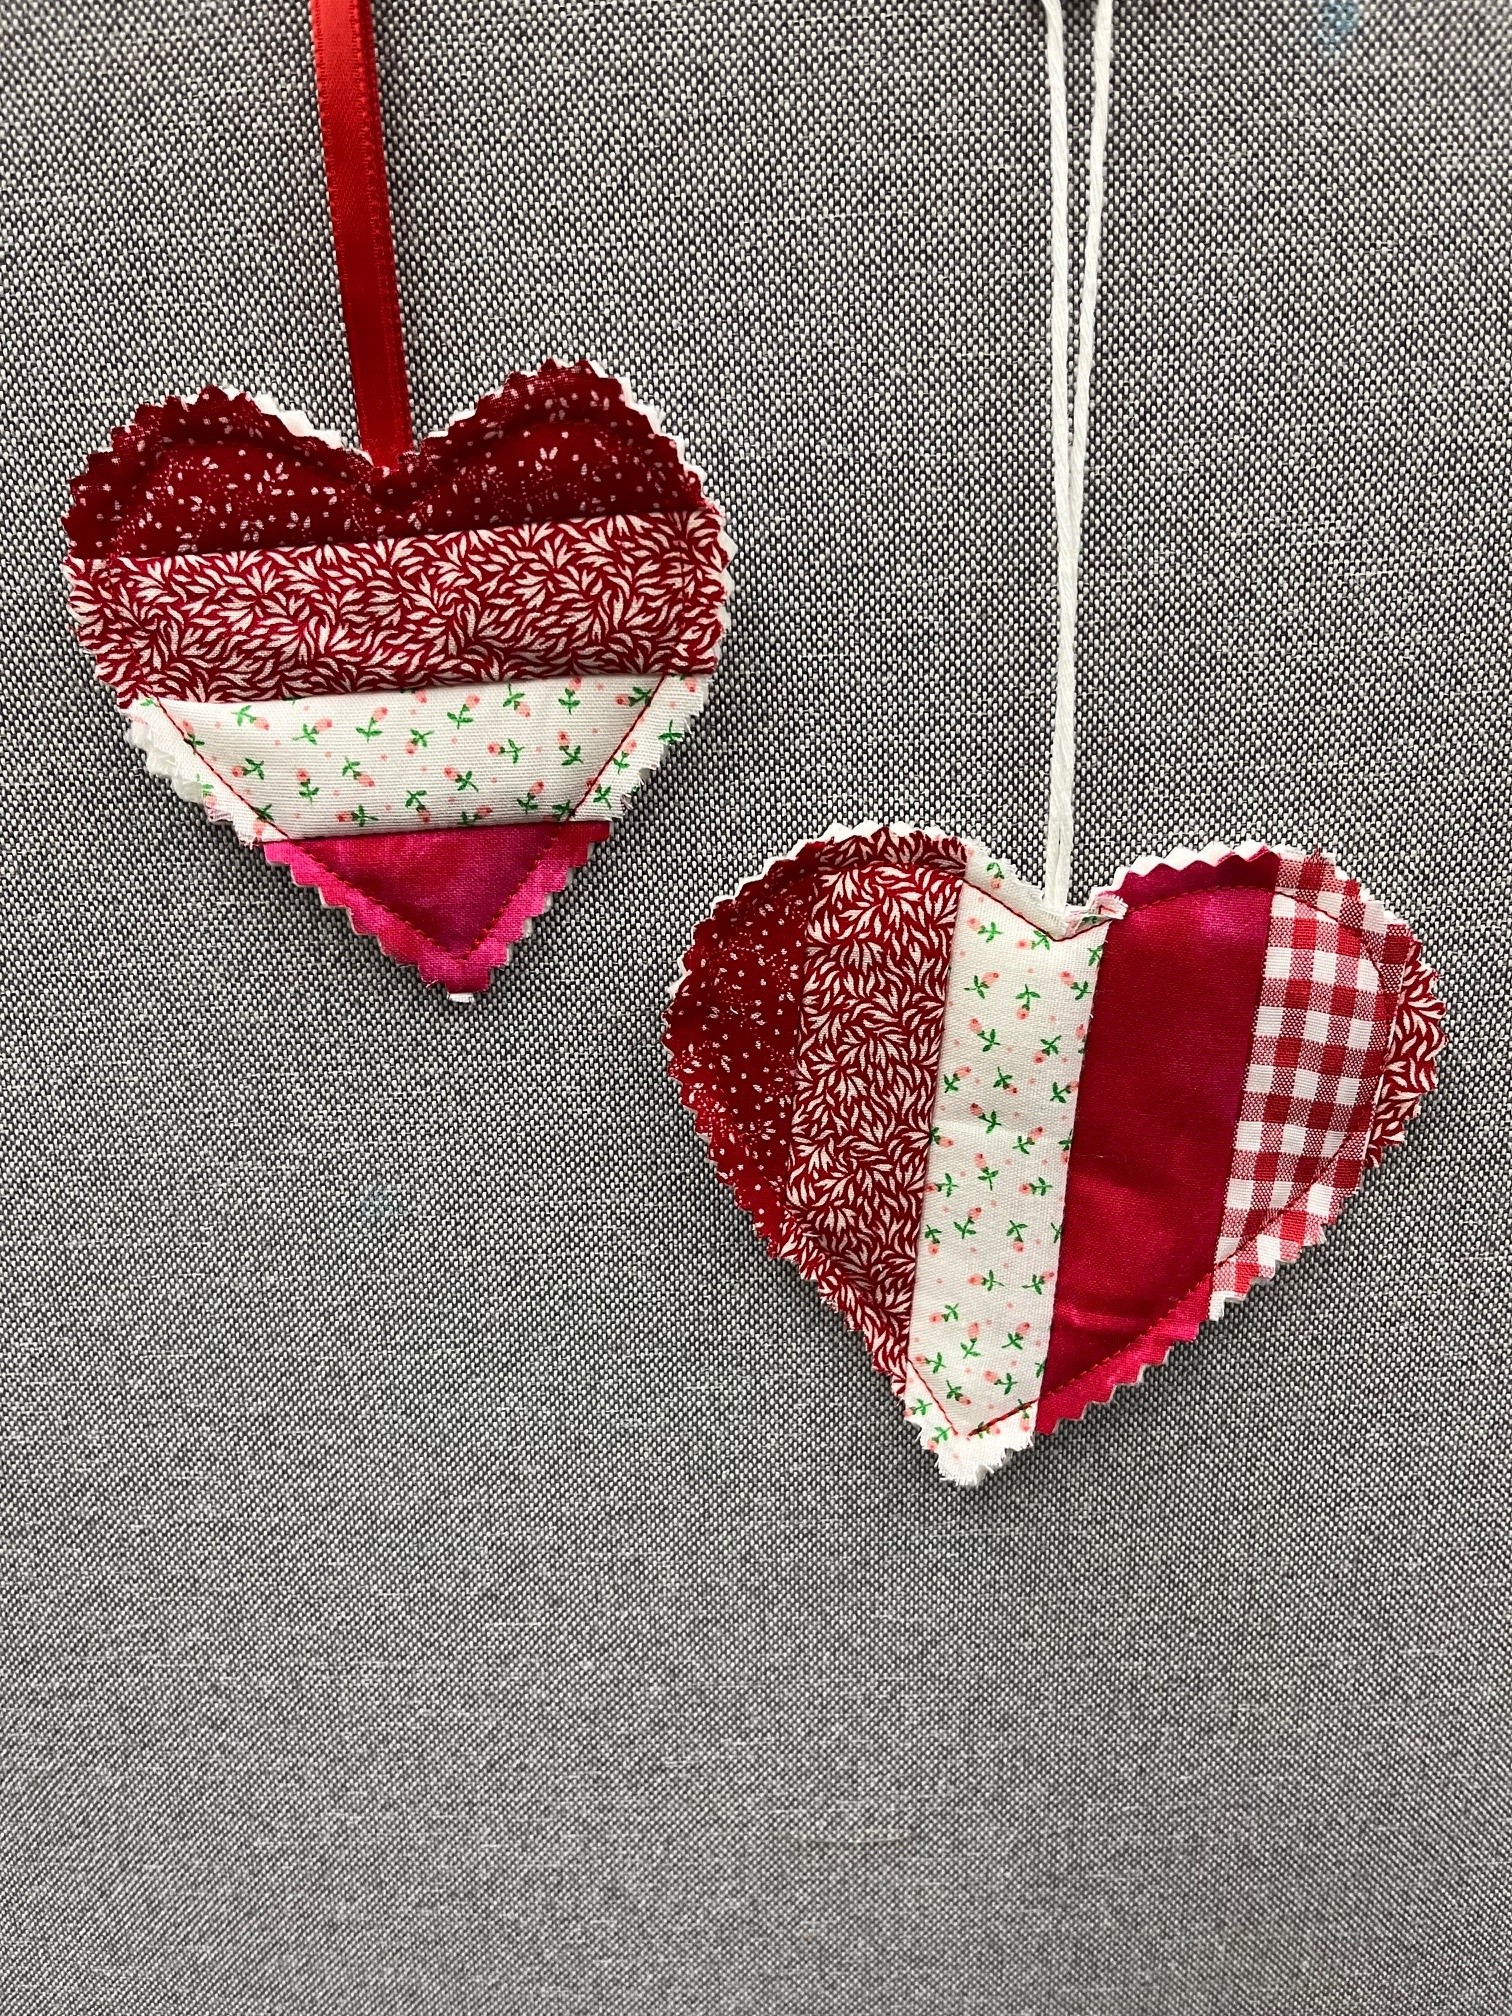 two quilted hearts in red and white stripes